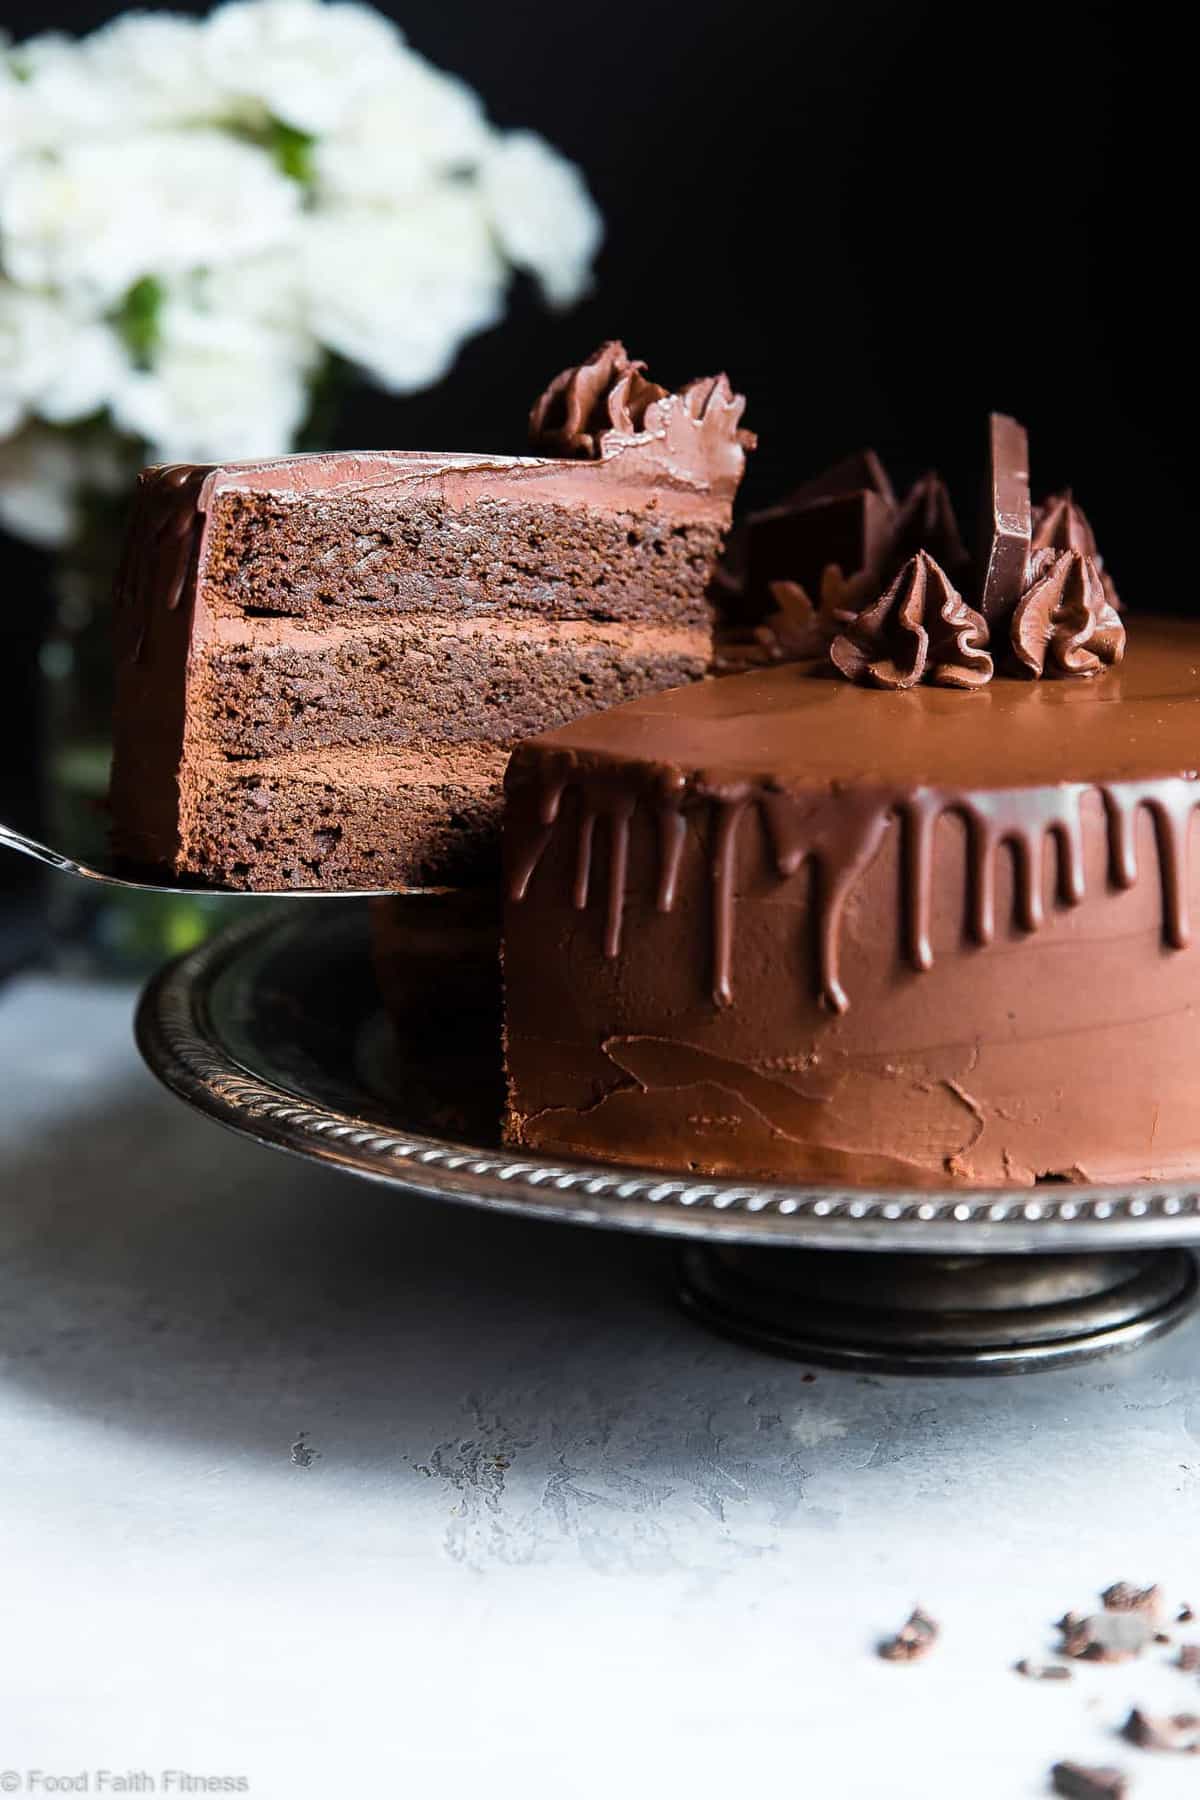 The Best Paleo Chocolate Avocado Cake with Coconut Flour - This dairy and gluten free Chocolate cake is SO fluffy and moist you'll never believe it's butter/oil free and made with avocado! The BEST healthy chocolate cake you will ever have! | #Foodfaithfitness | #Paleo #Grainfree #Dairyfree #Healthy #cake